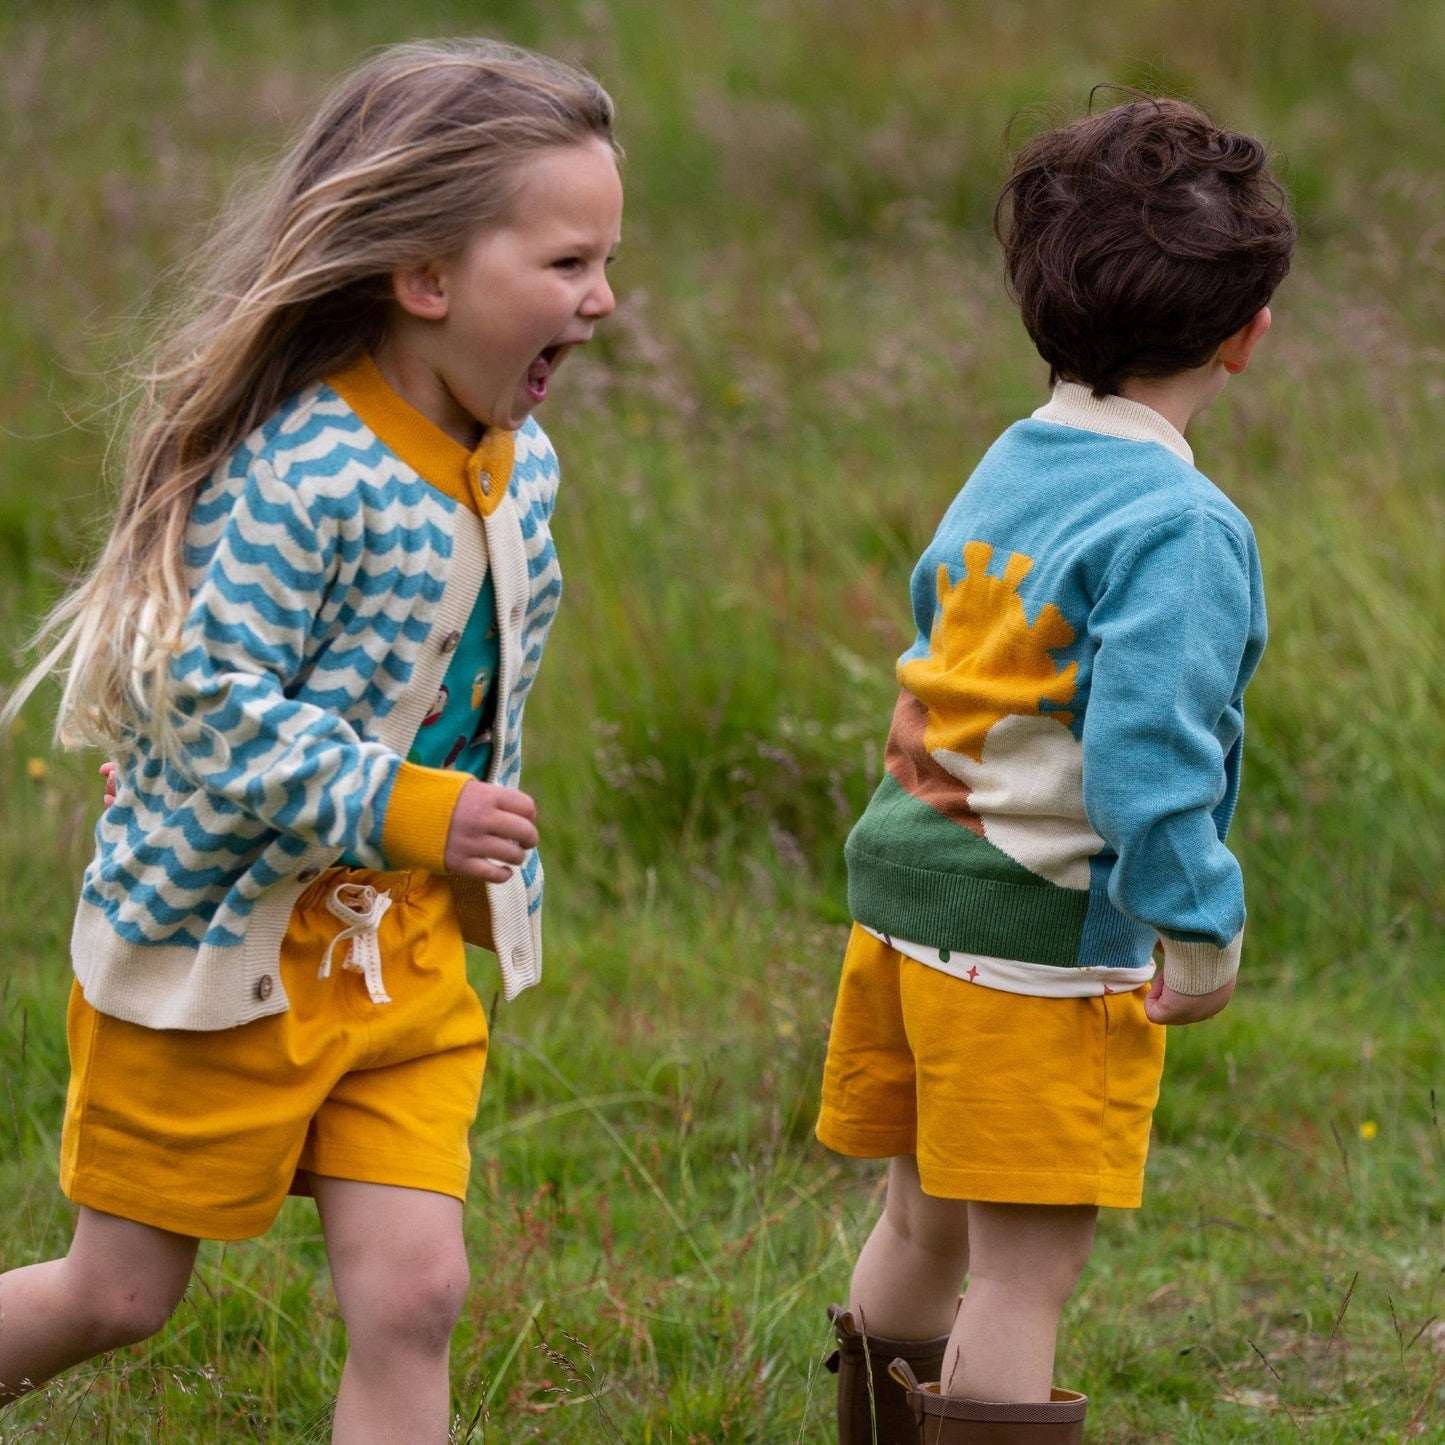 Two children walking in a grass field, one wearing From One To Another Sunshine Design Knitted Cardigan